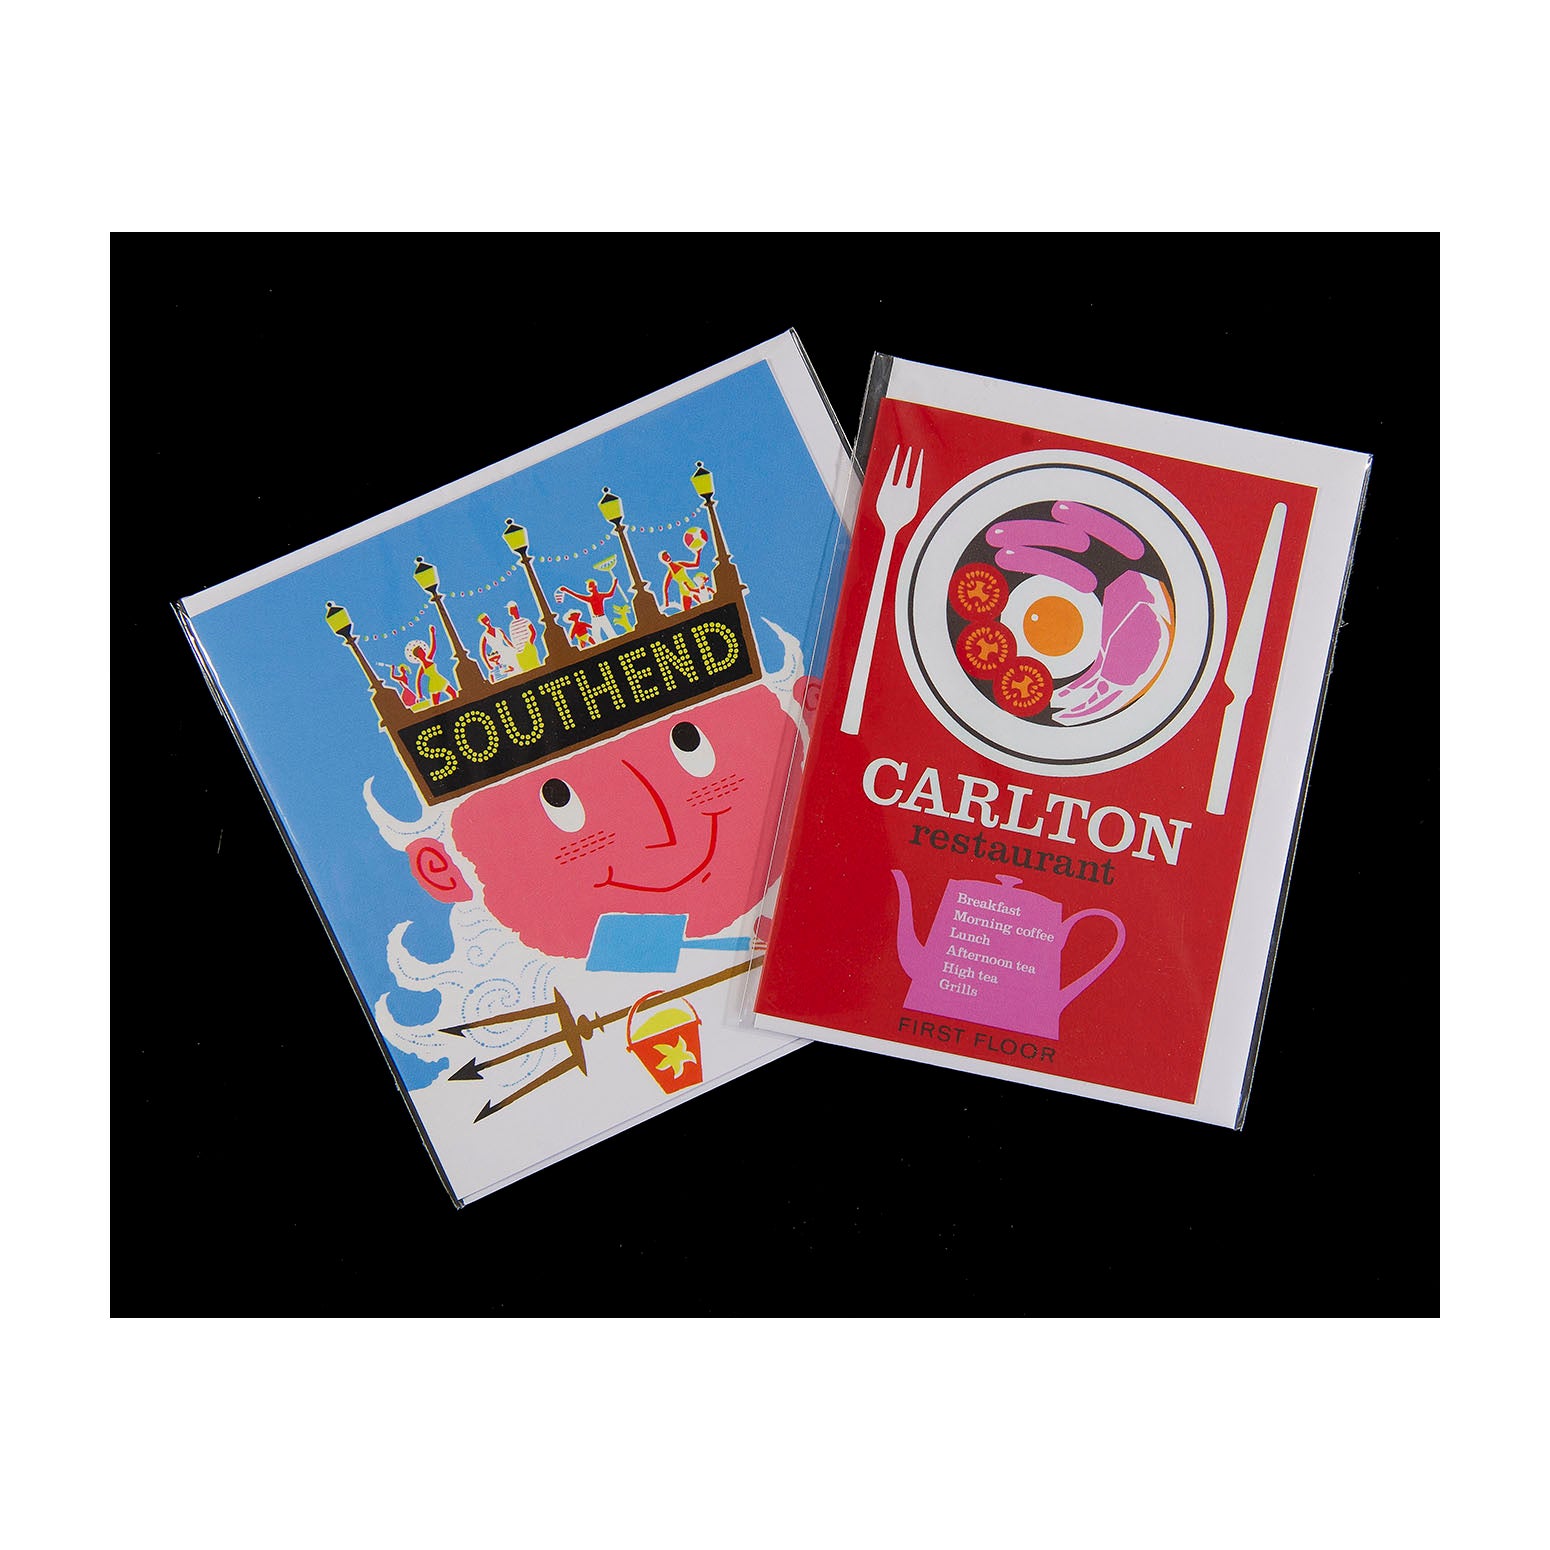 Set of four greetings cards featuring 1960's poster designs by Daphne Padden.